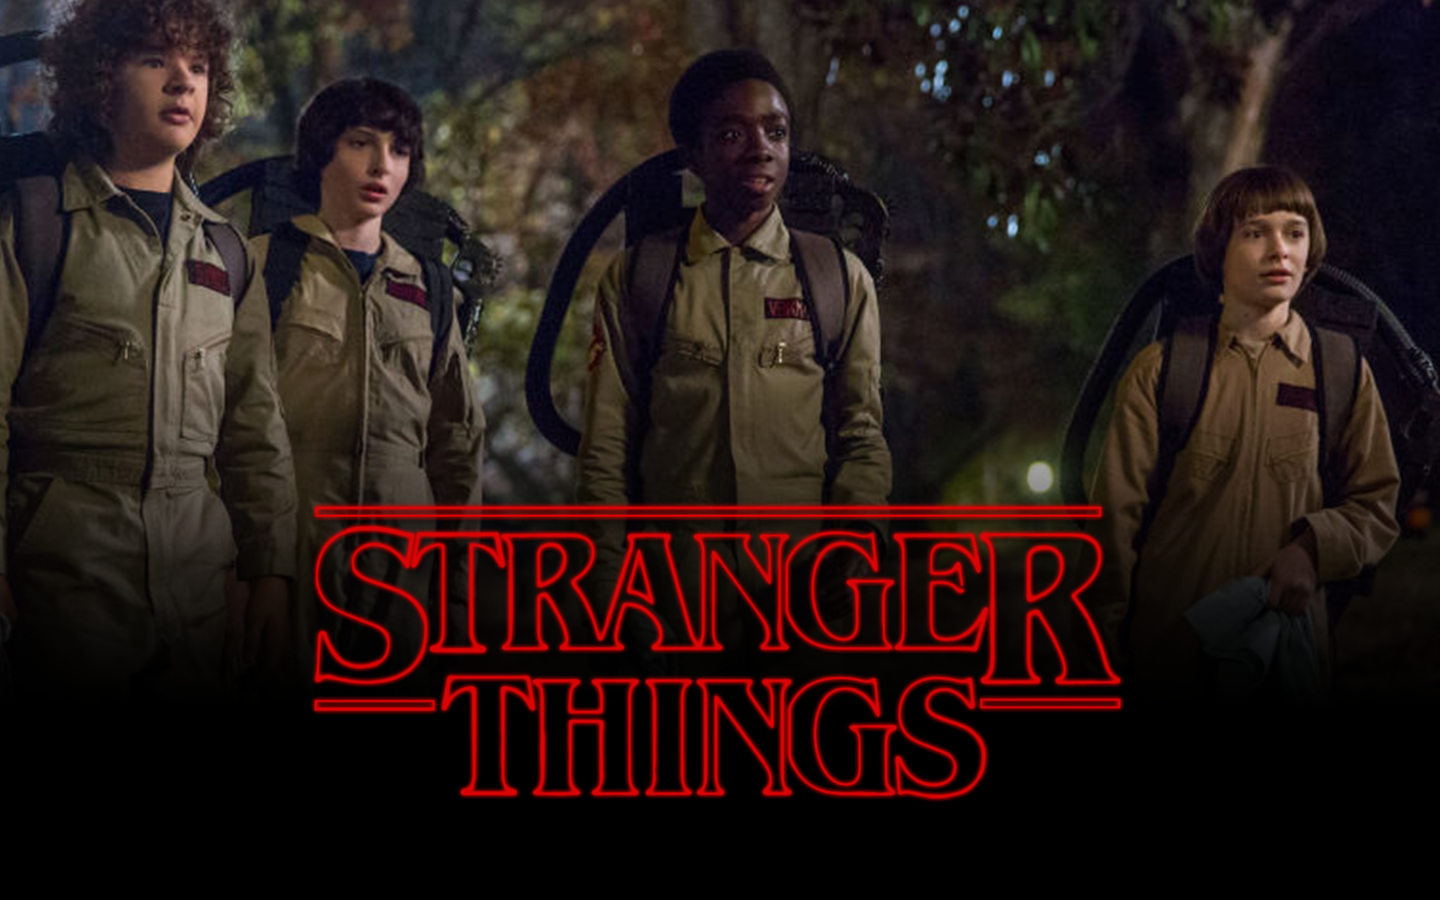 Stranger Things Filming Last Two Episodes of Season 2